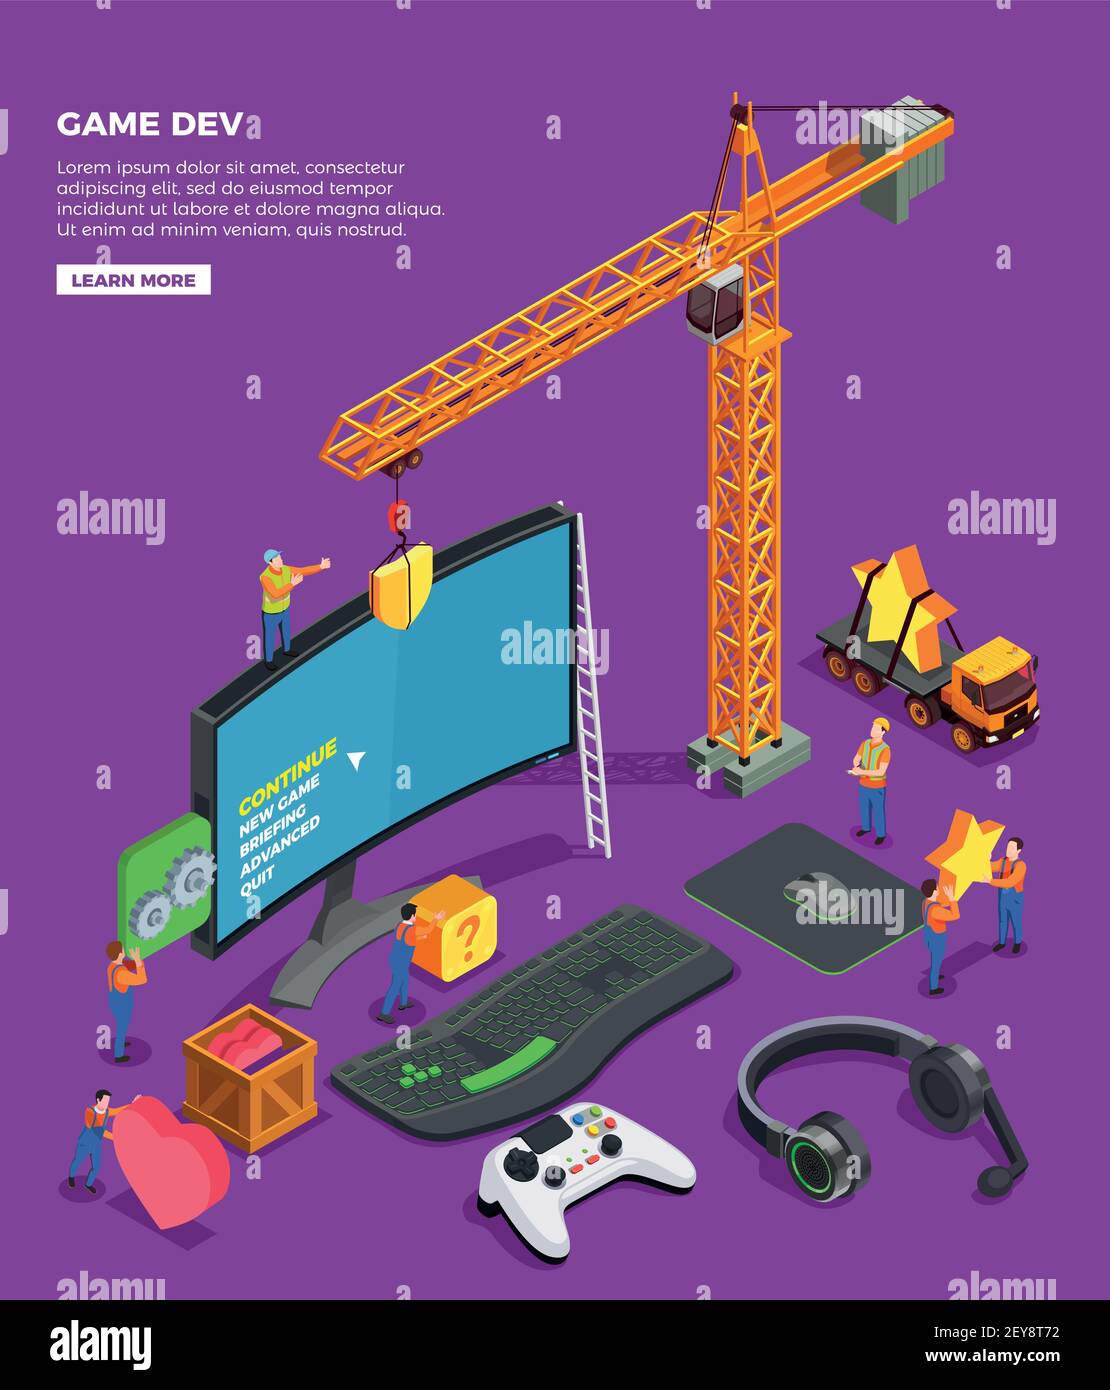 Game development isometric composition with big screen keyboard joystick for video game headphones and crane as symbol of game industry vector illustr Stock Vector